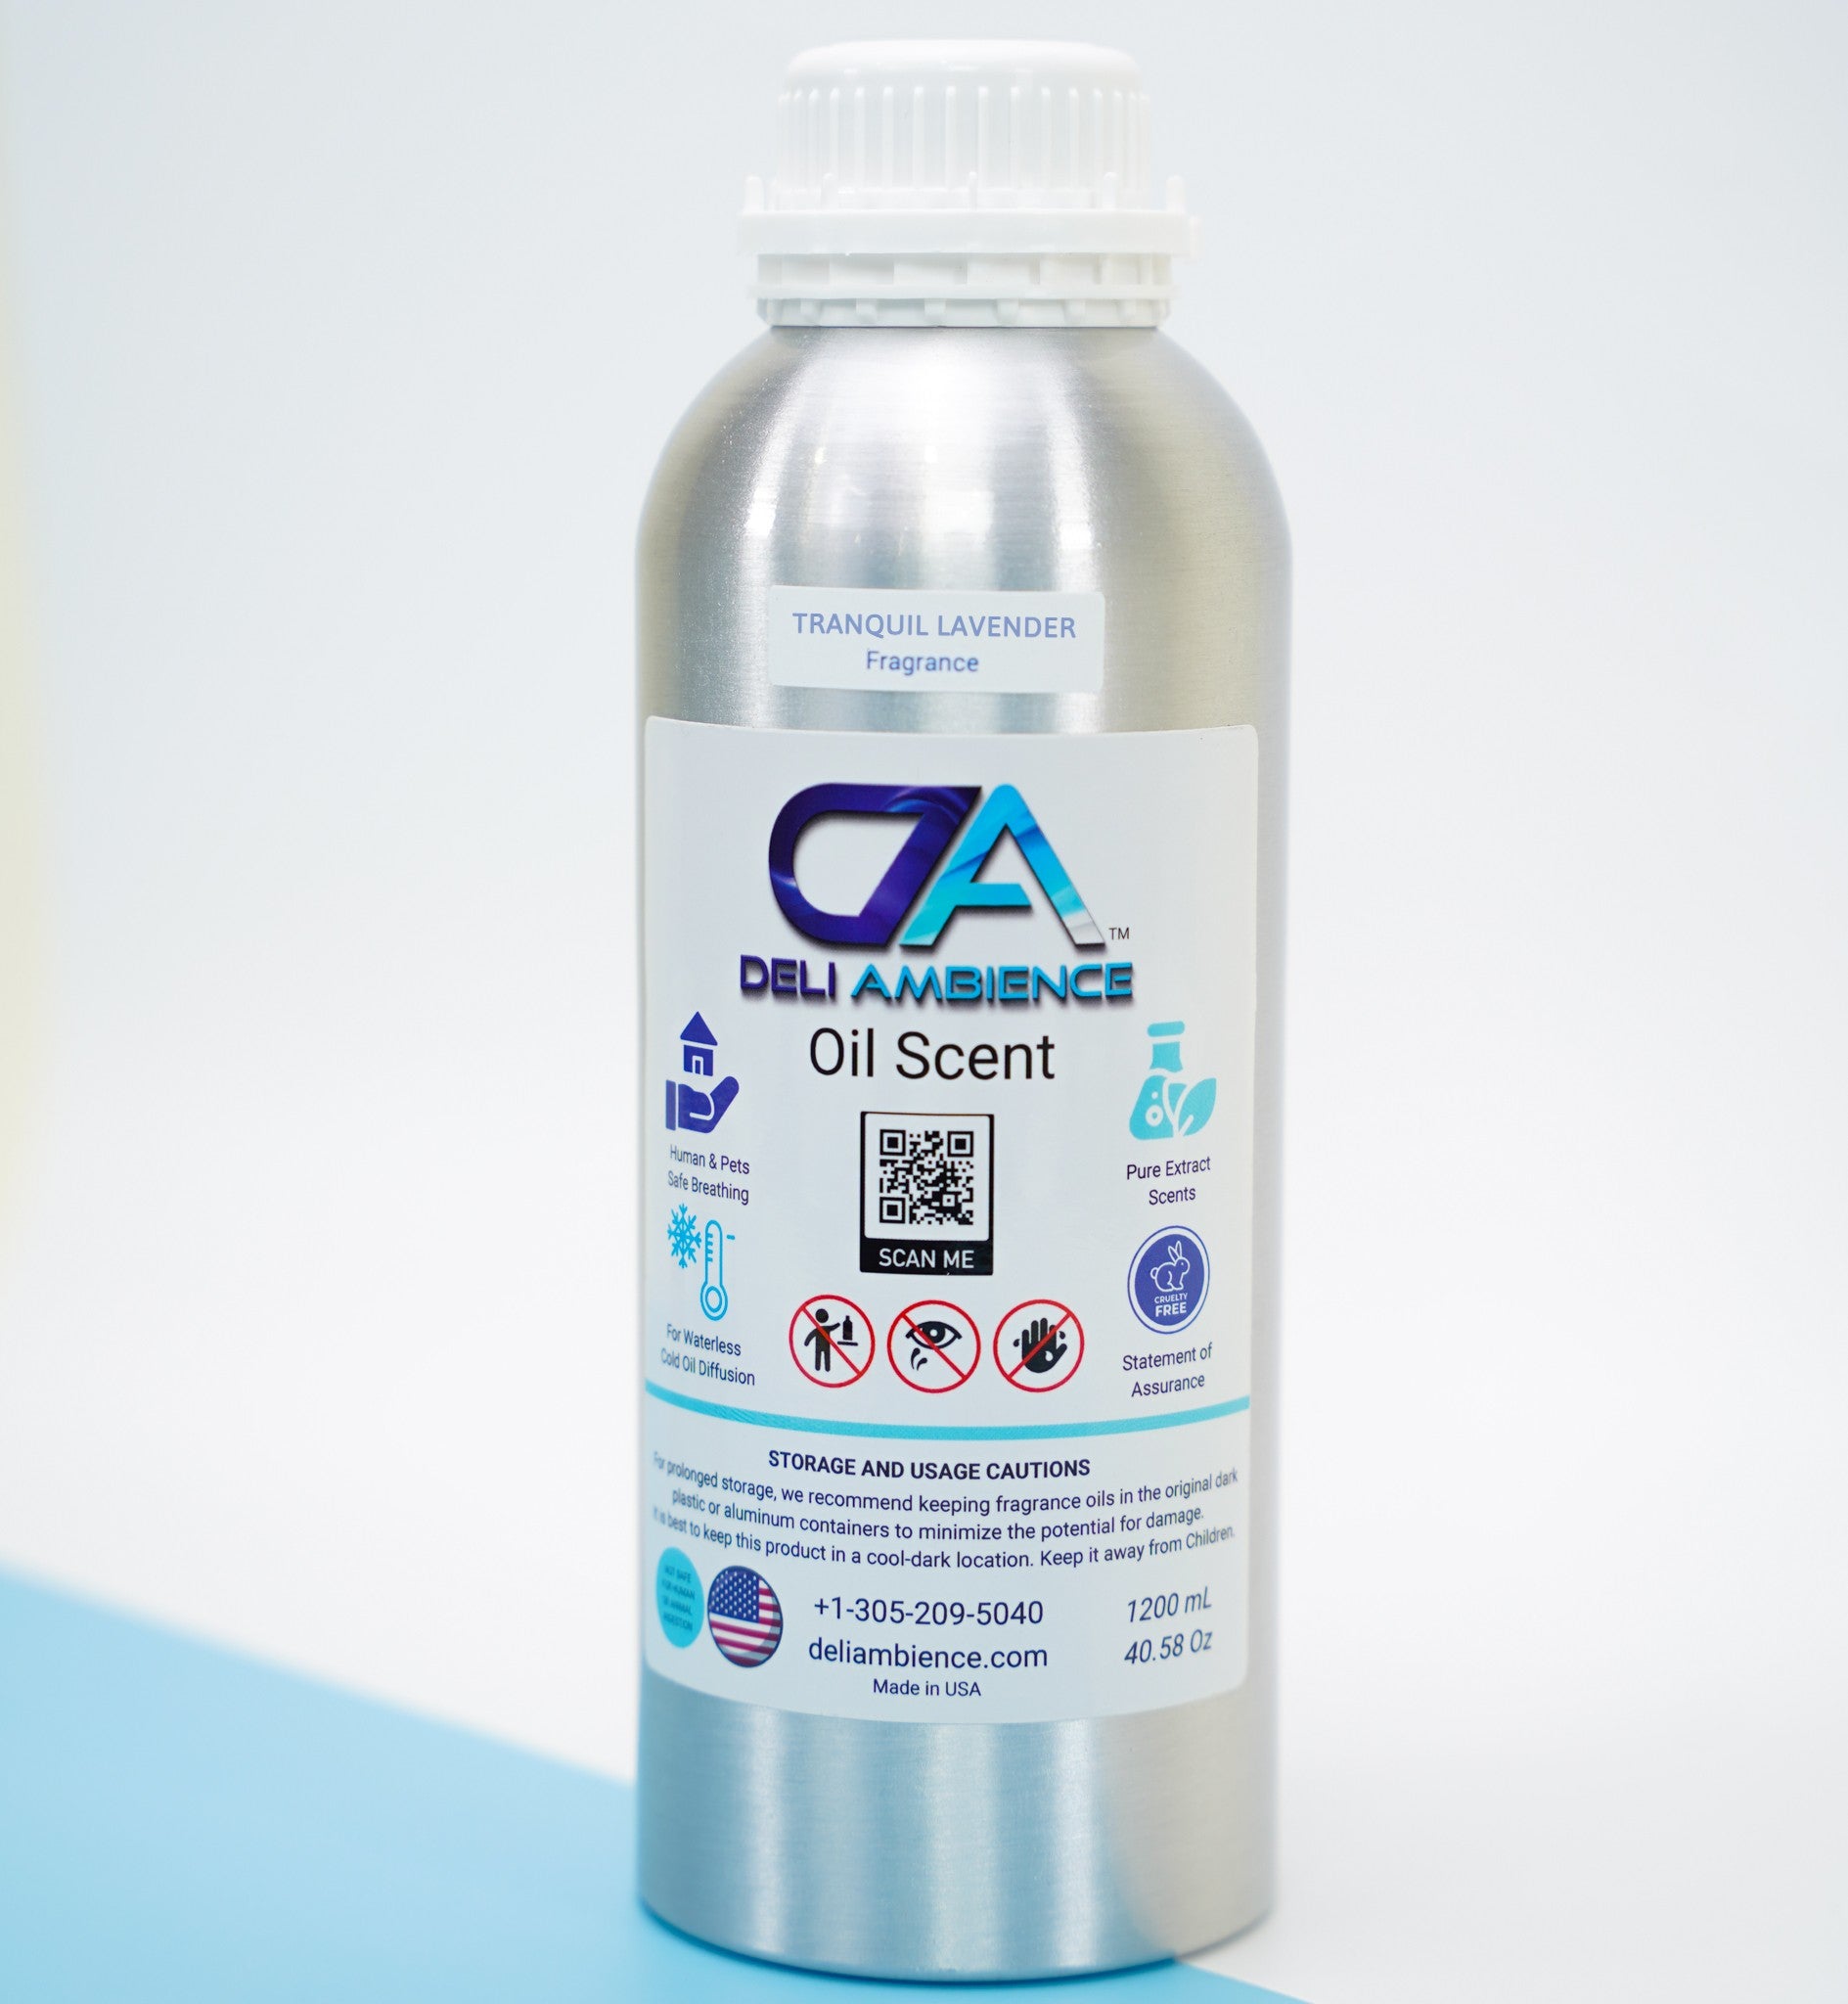 A silver bottle of Tranquil Lavender Oil Scent, labeled "tranquil lavender oil scent, fragrance lavender" with a qr code and various icons indicating product features, displayed against a blue and white background.